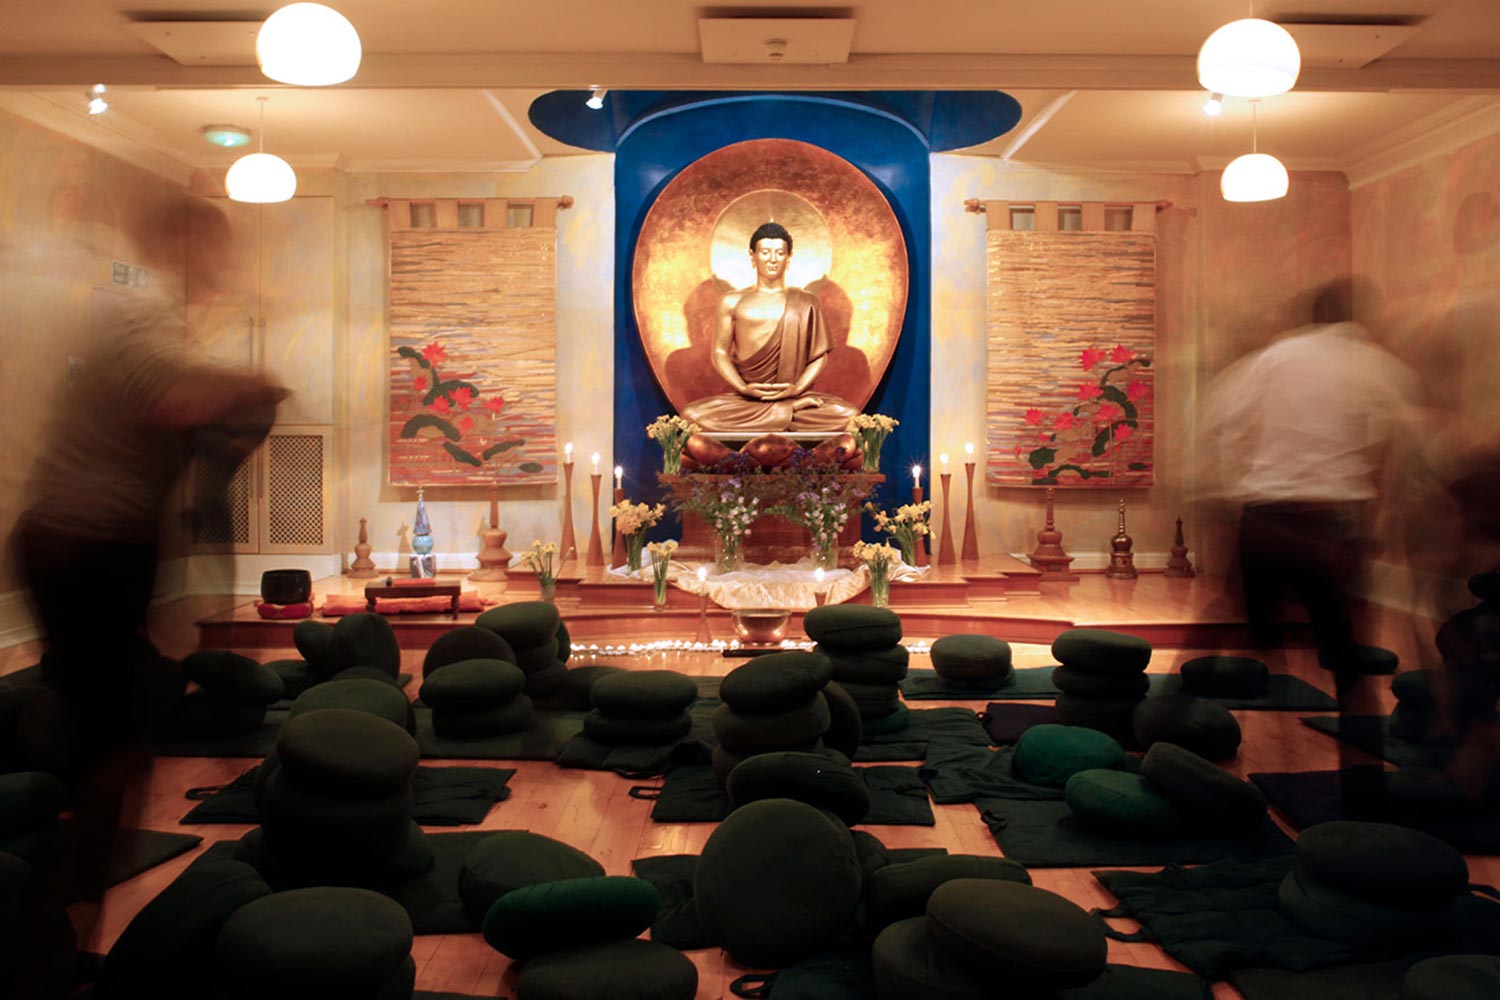 Meditation cushions at the London Buddhist Centre in East London